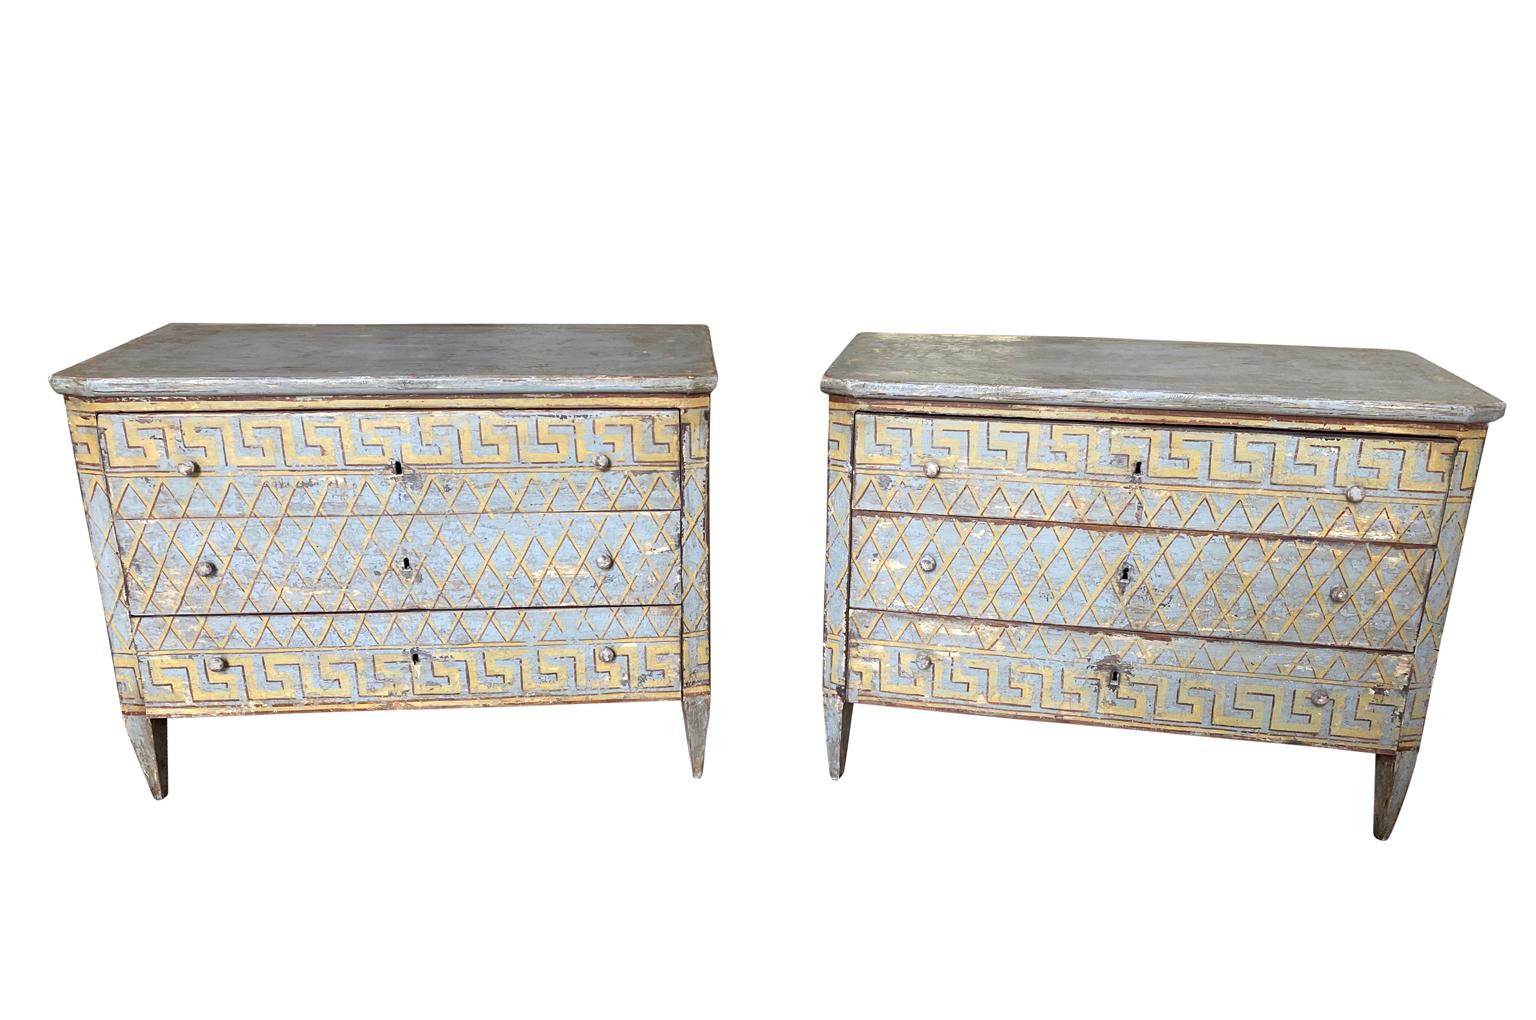 A wonderful pair of later 19th century commodes from the Catalan region of Spain. Soundly constructed from painted wood with three drawers over tapered legs and a lovely Greek Key motif. Terrific as bedside tables or converted into vanities. One